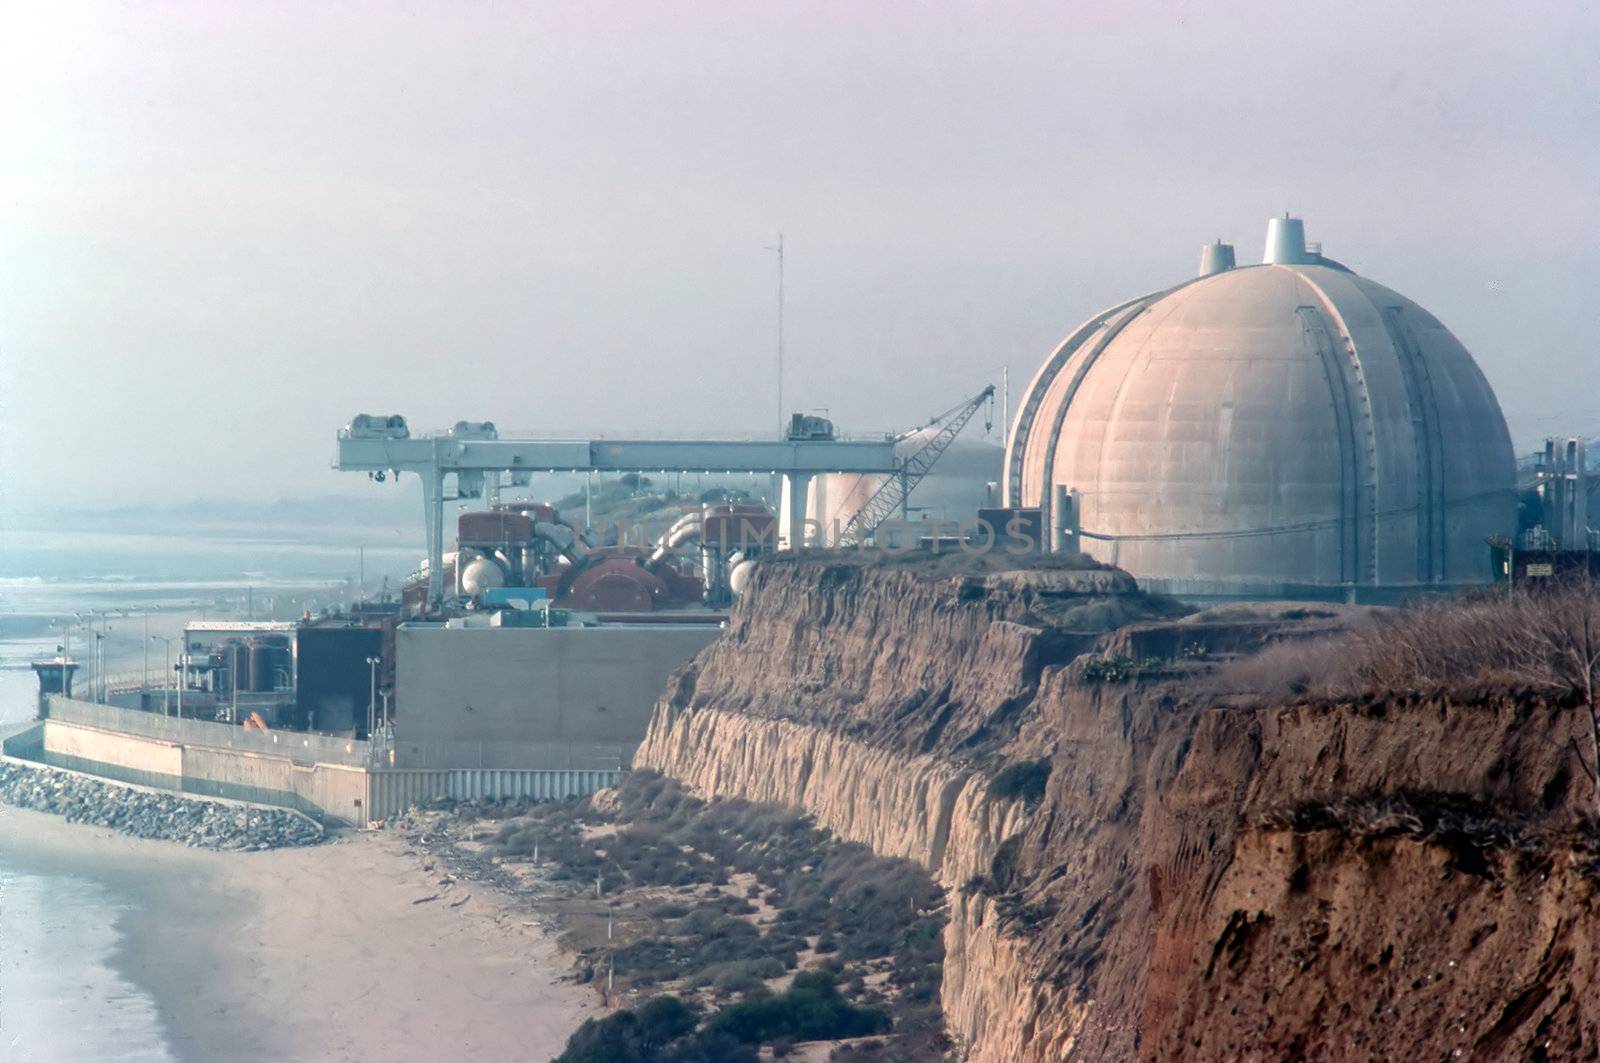 Nuclear Power Plant in San Onofre, California